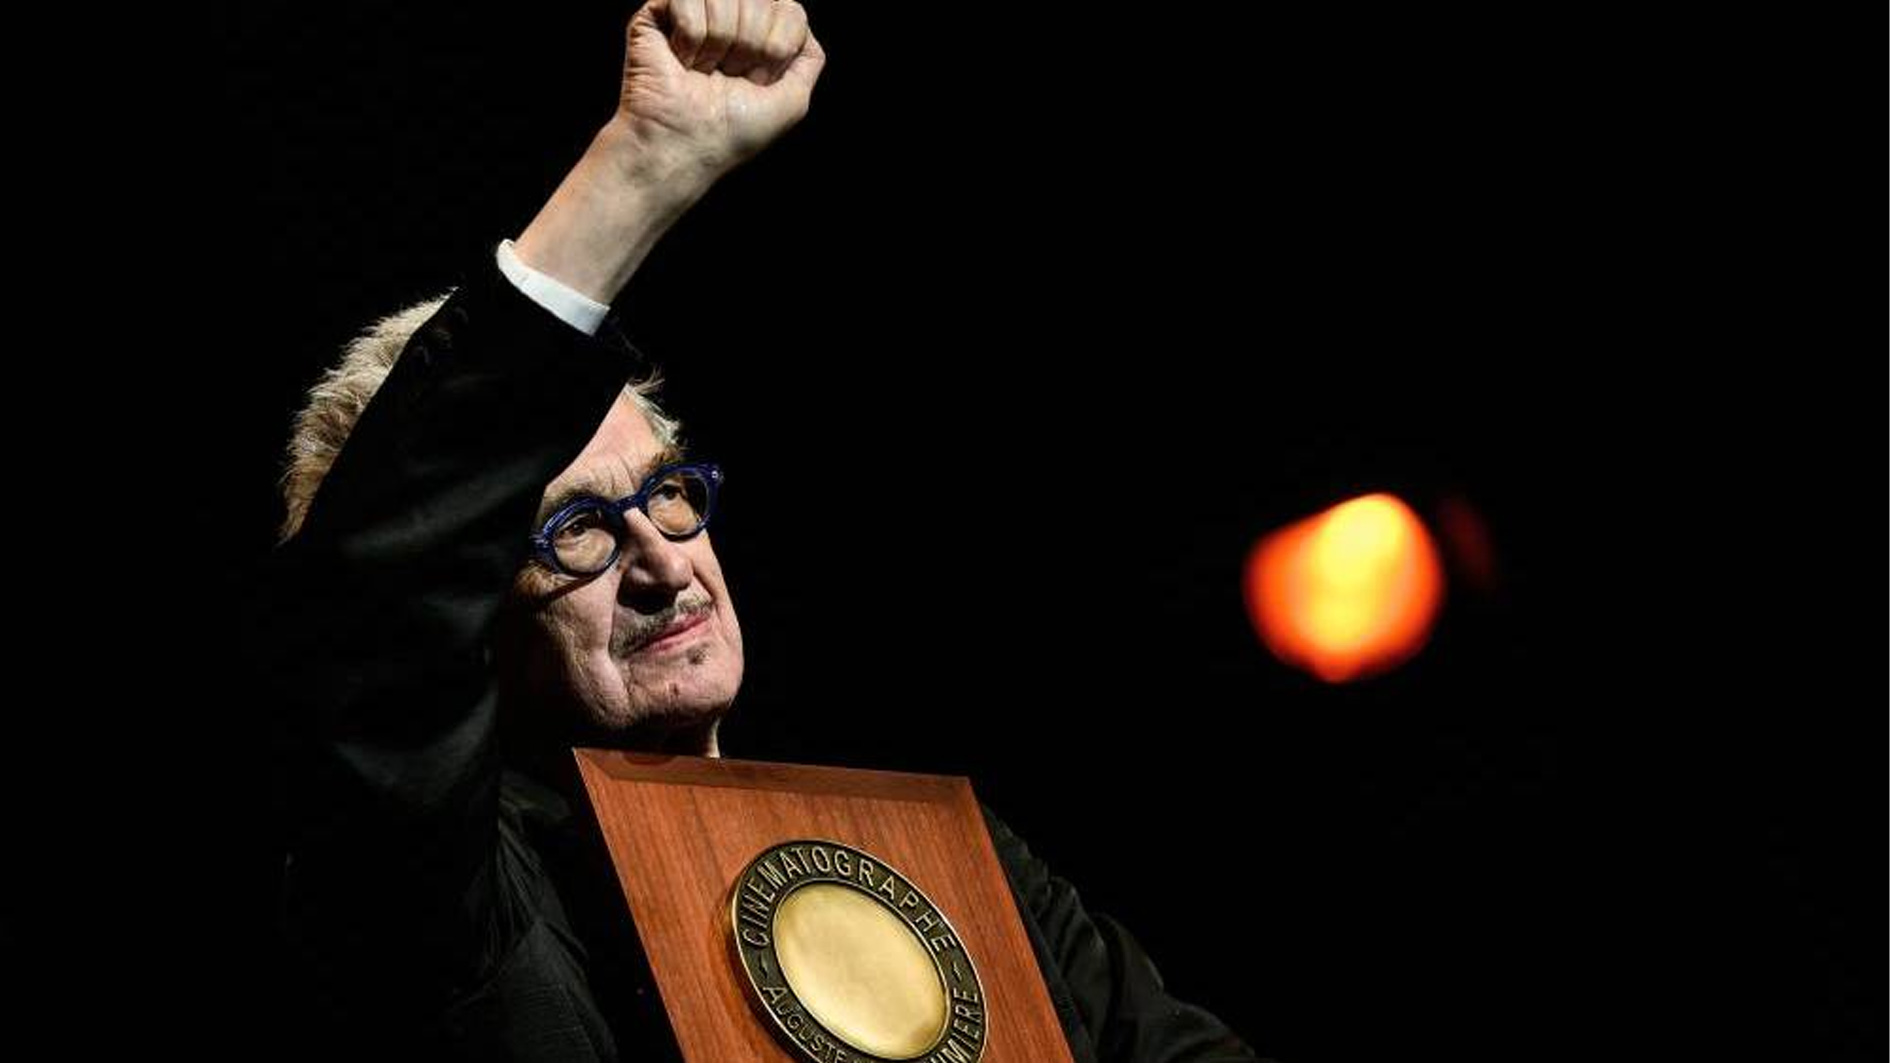 At 78, Wenders, who won the 2023 Lumiere Prize, is still waiting for his next film.